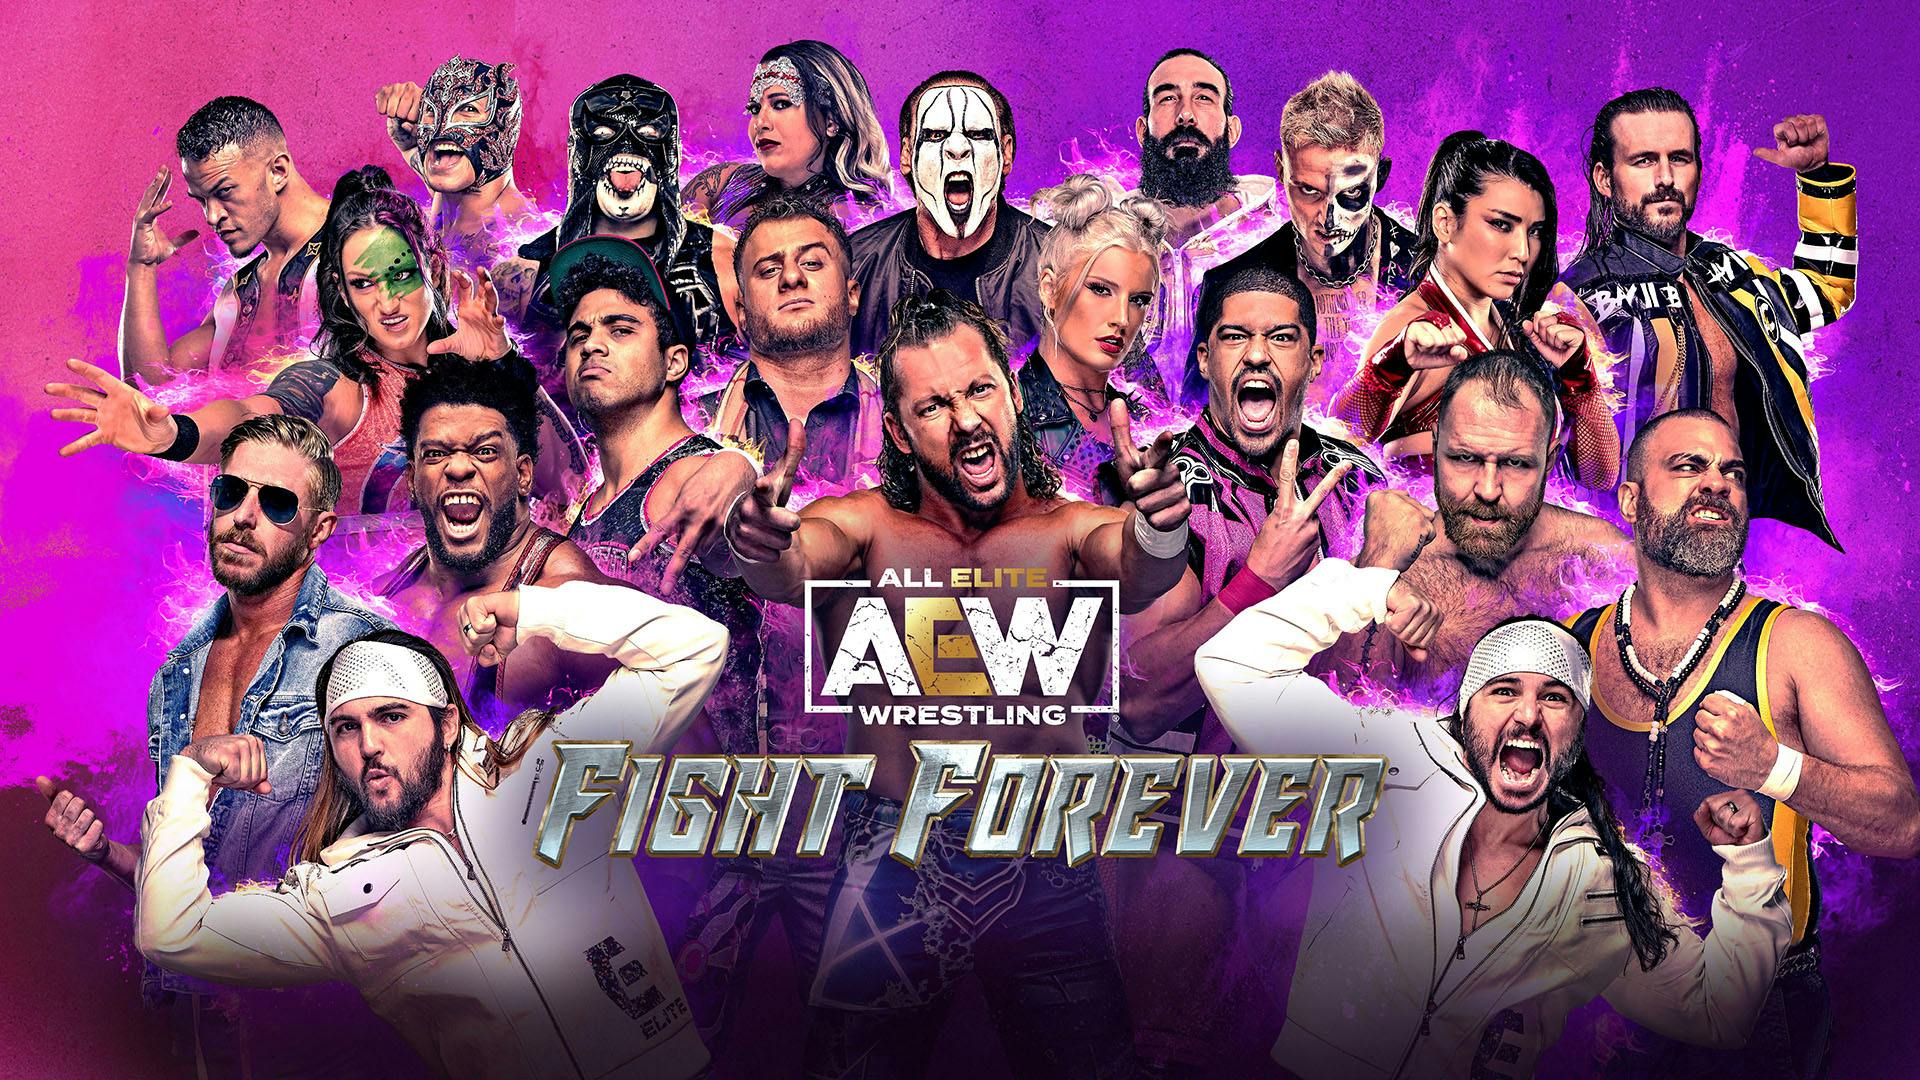 What should AEW do with Hook moving forward? : r/AEWOfficial